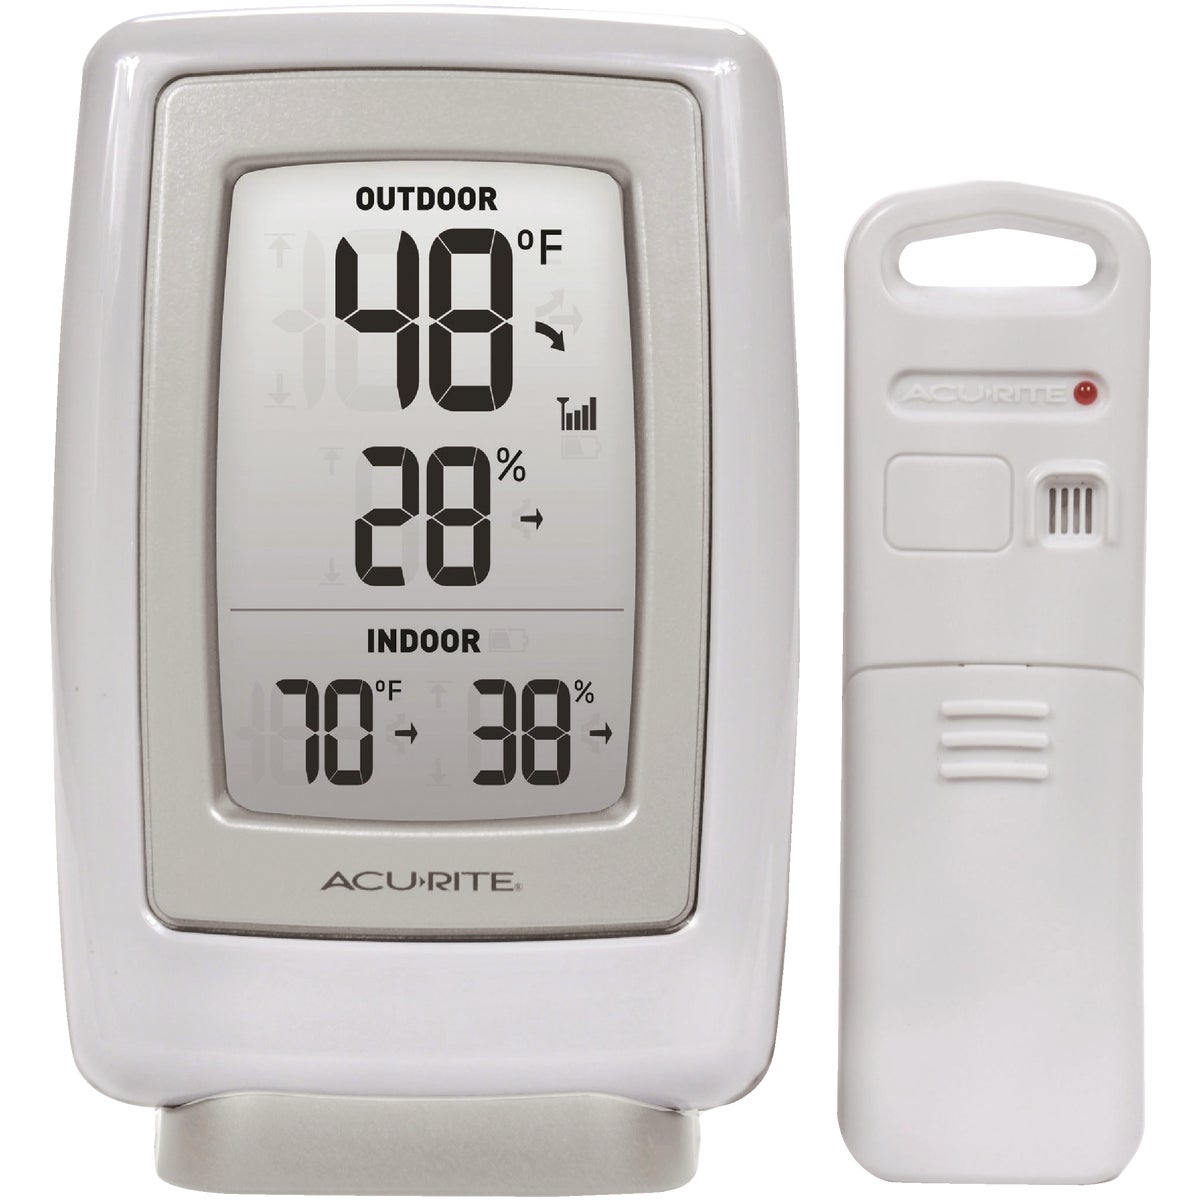 Item 618665, Indoor/outdoor temperature and humidity. Large, easy-to-read display.